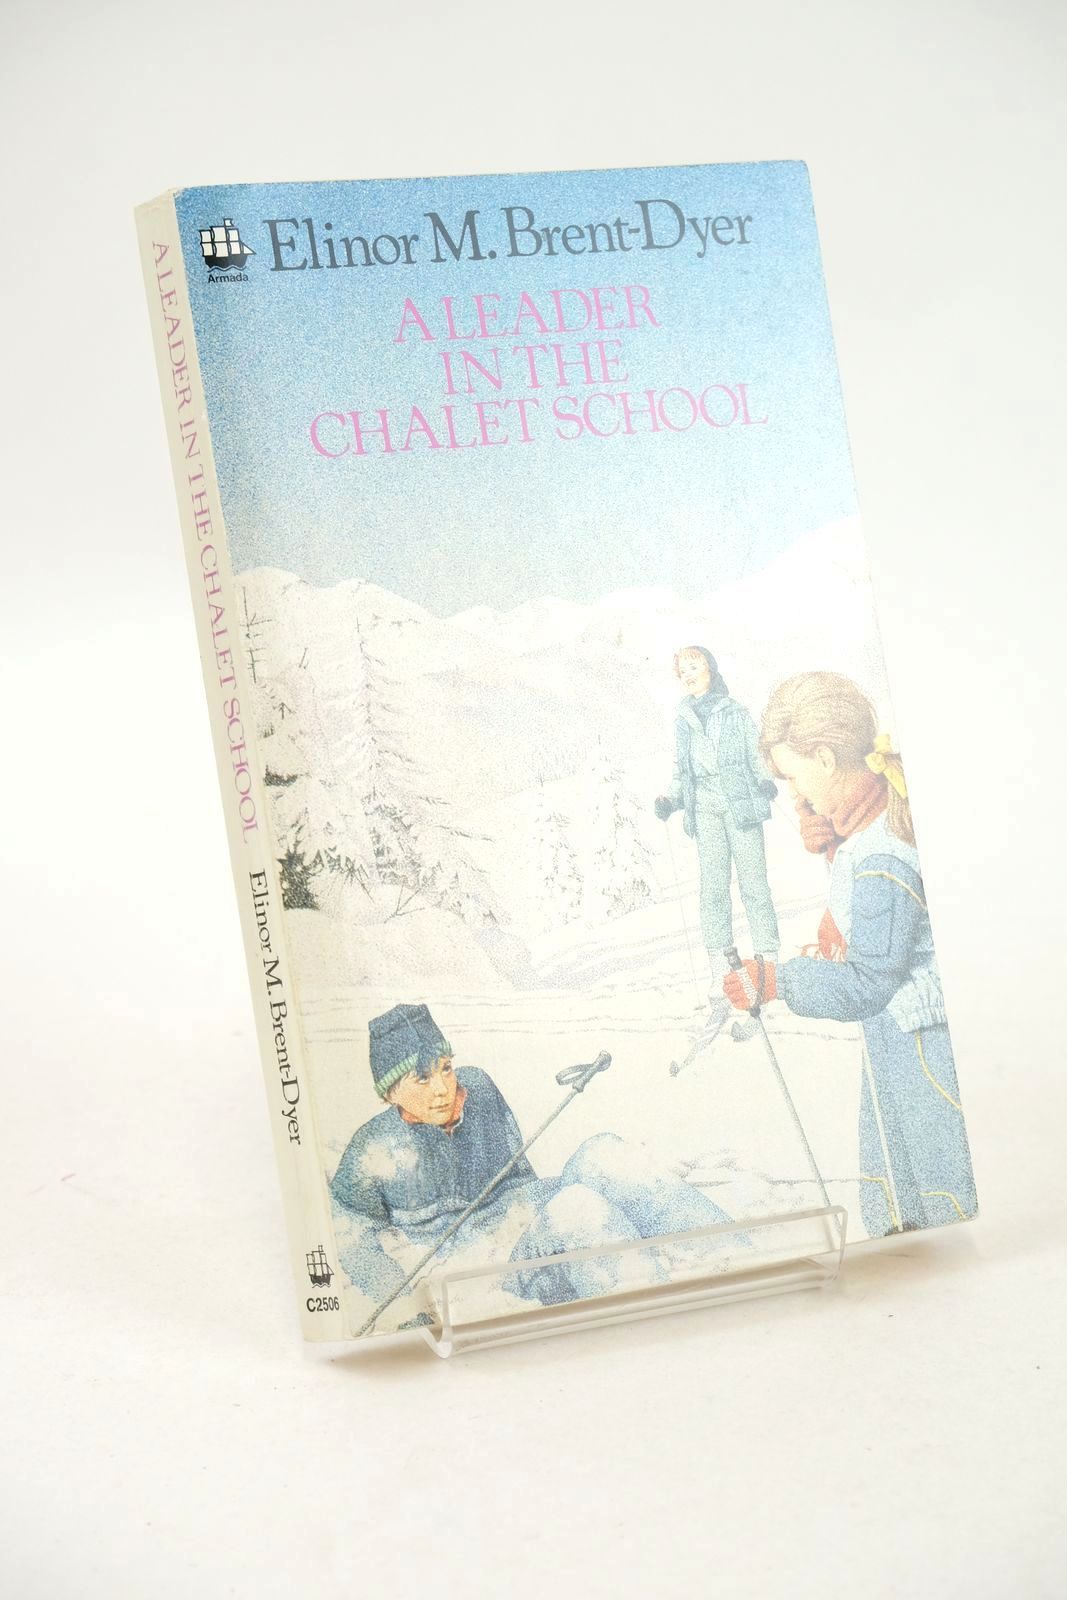 Photo of A LEADER IN THE CHALET SCHOOL written by Brent-Dyer, Elinor M. published by Armada (STOCK CODE: 1325689)  for sale by Stella & Rose's Books